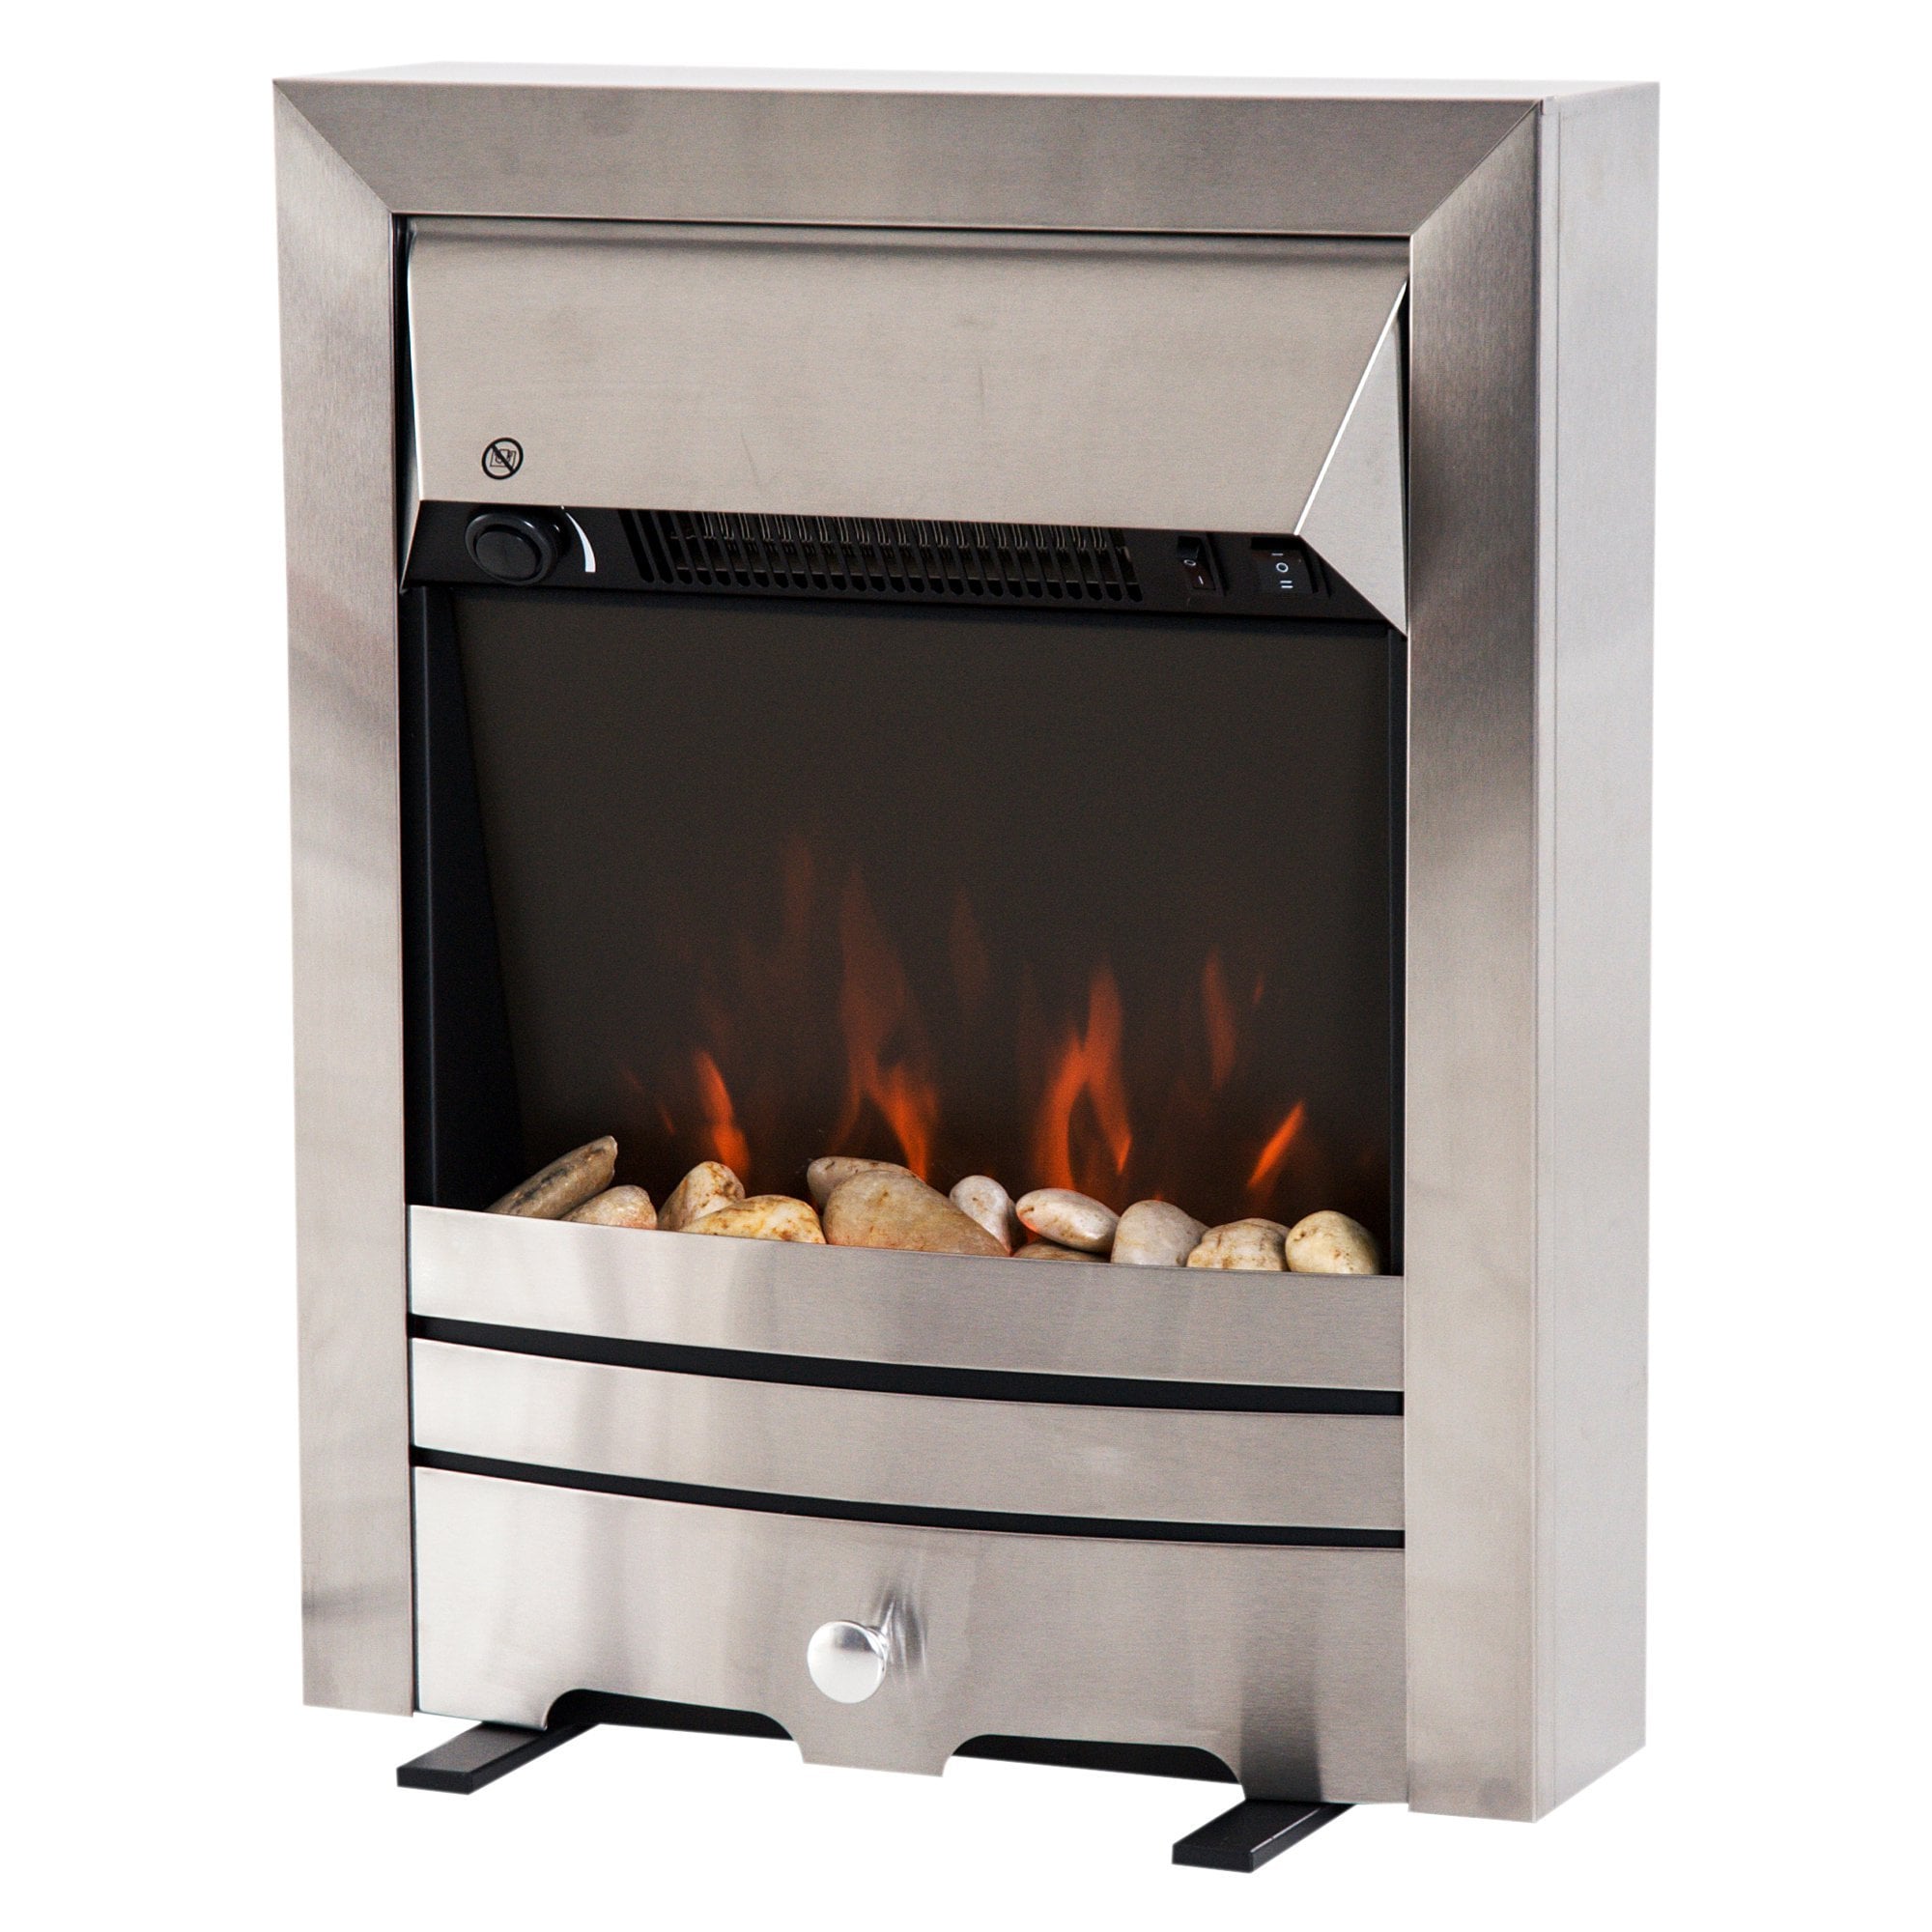 HOMCOM LED Flame Electric Fire Place-Stainless Steel 2KW Pebble Burning Effect Heater Indoor Stove Lighting  | TJ Hughes